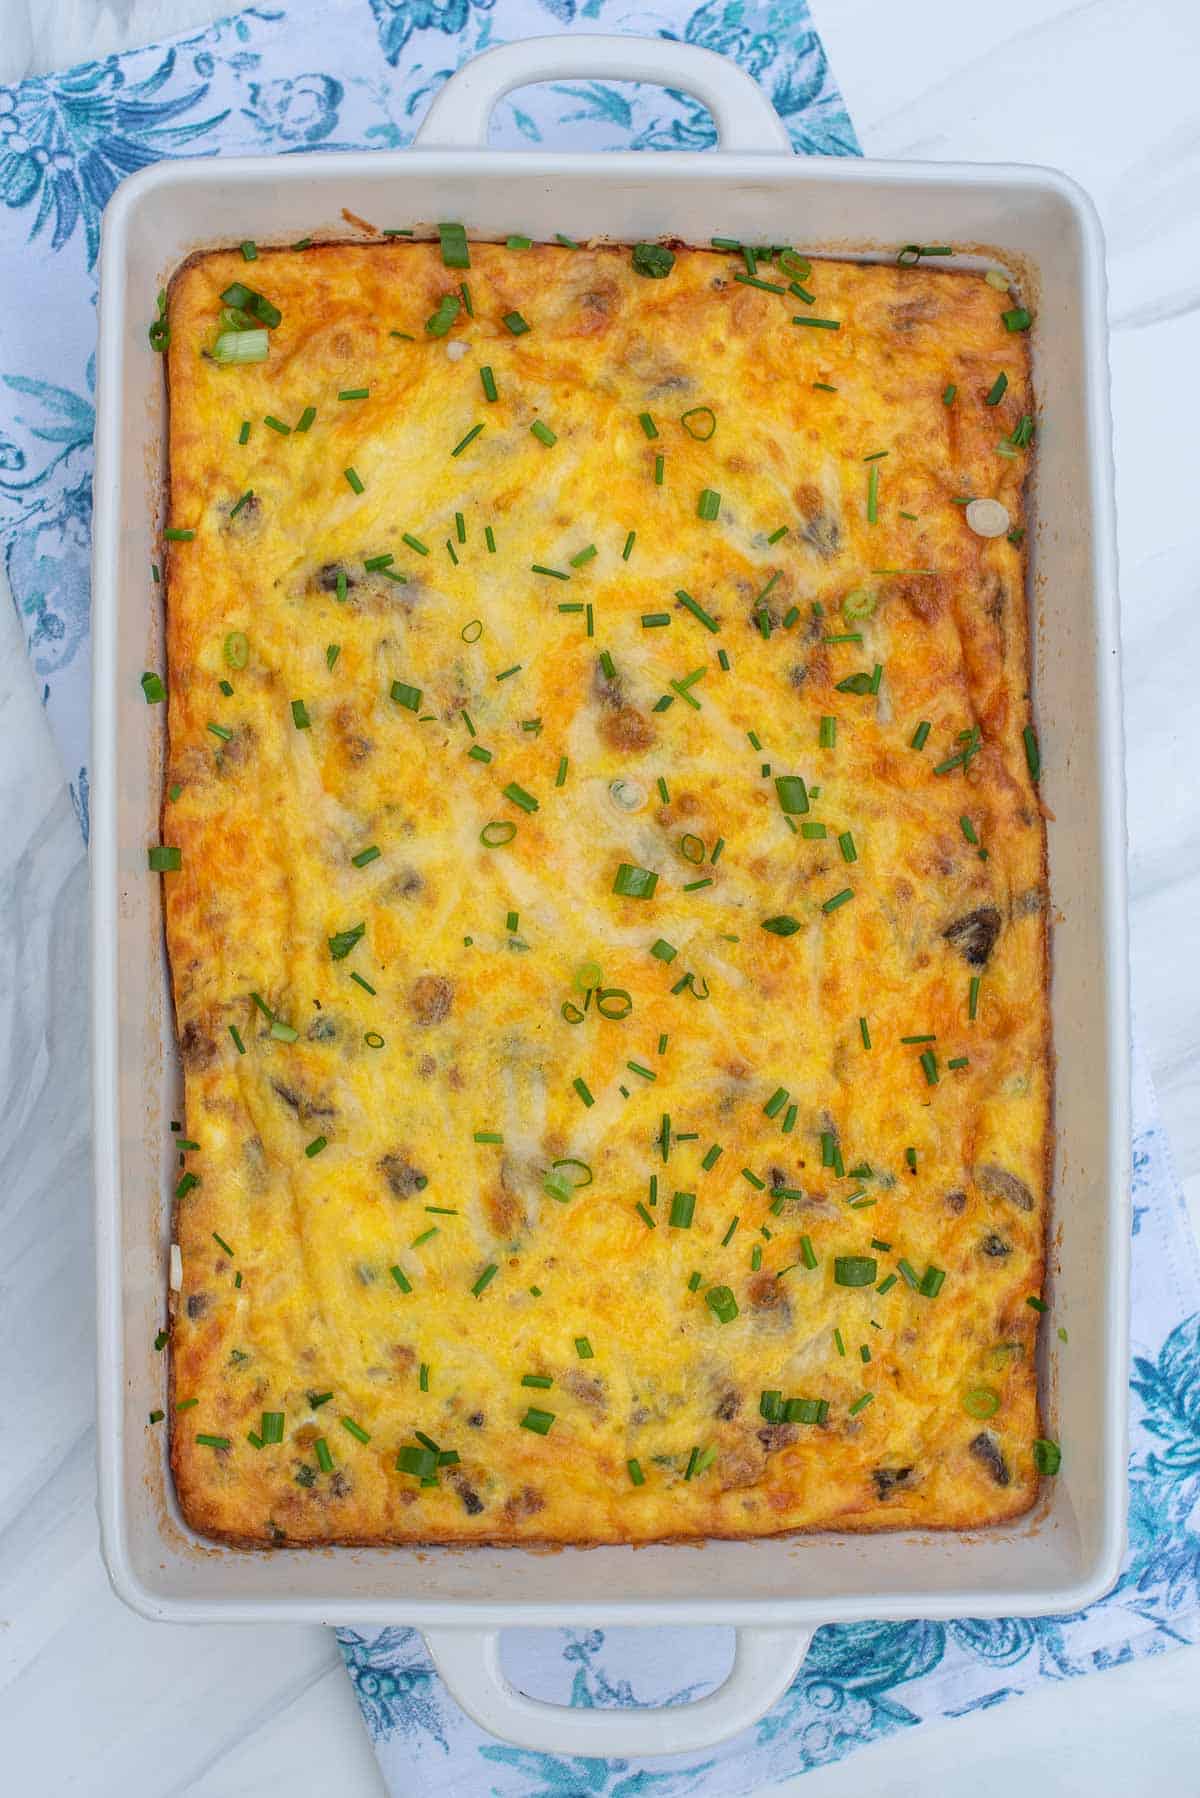 A baked quiche in a 13 by 9 baking dish.